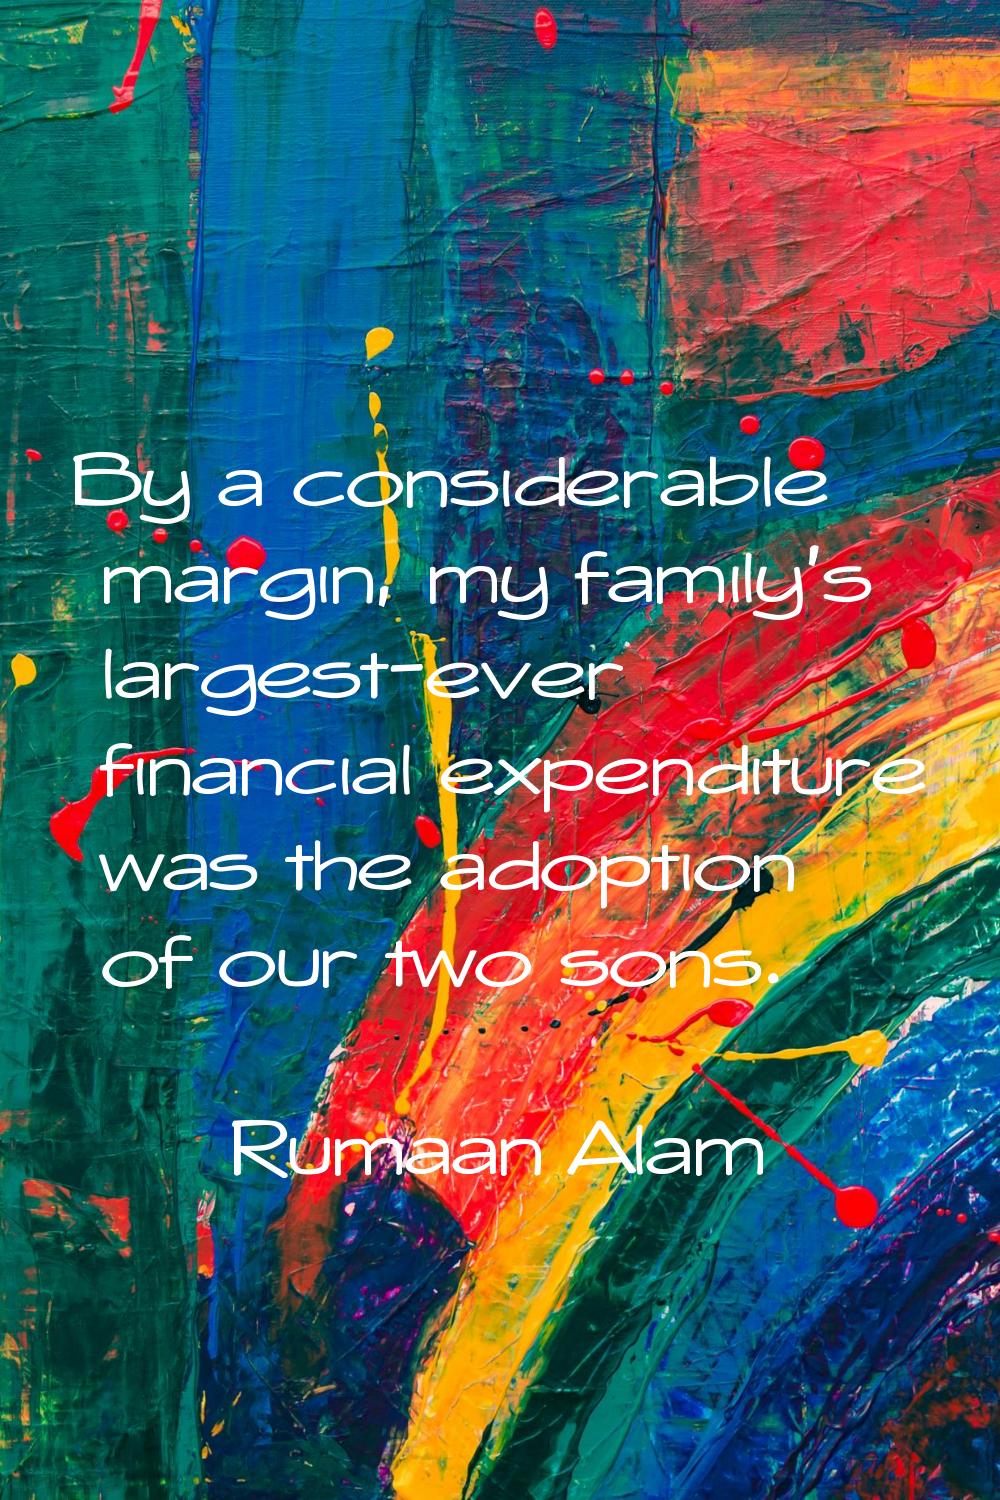 By a considerable margin, my family's largest-ever financial expenditure was the adoption of our tw